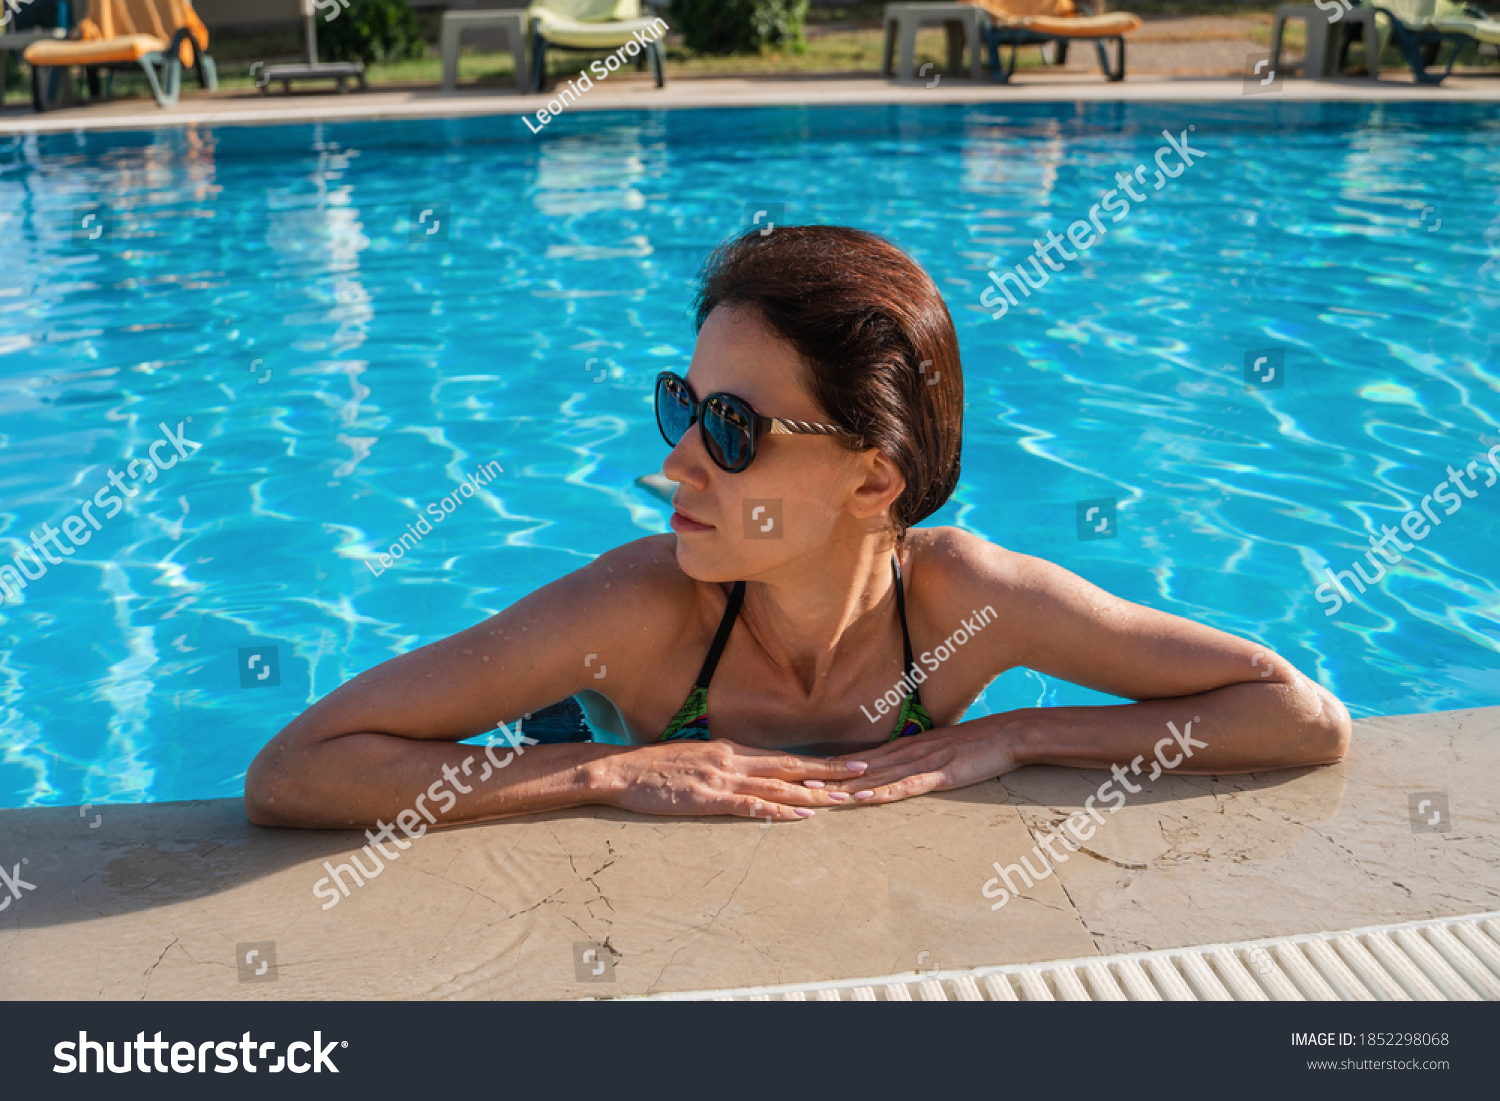 Asian woman pouring nude body with water before the pool